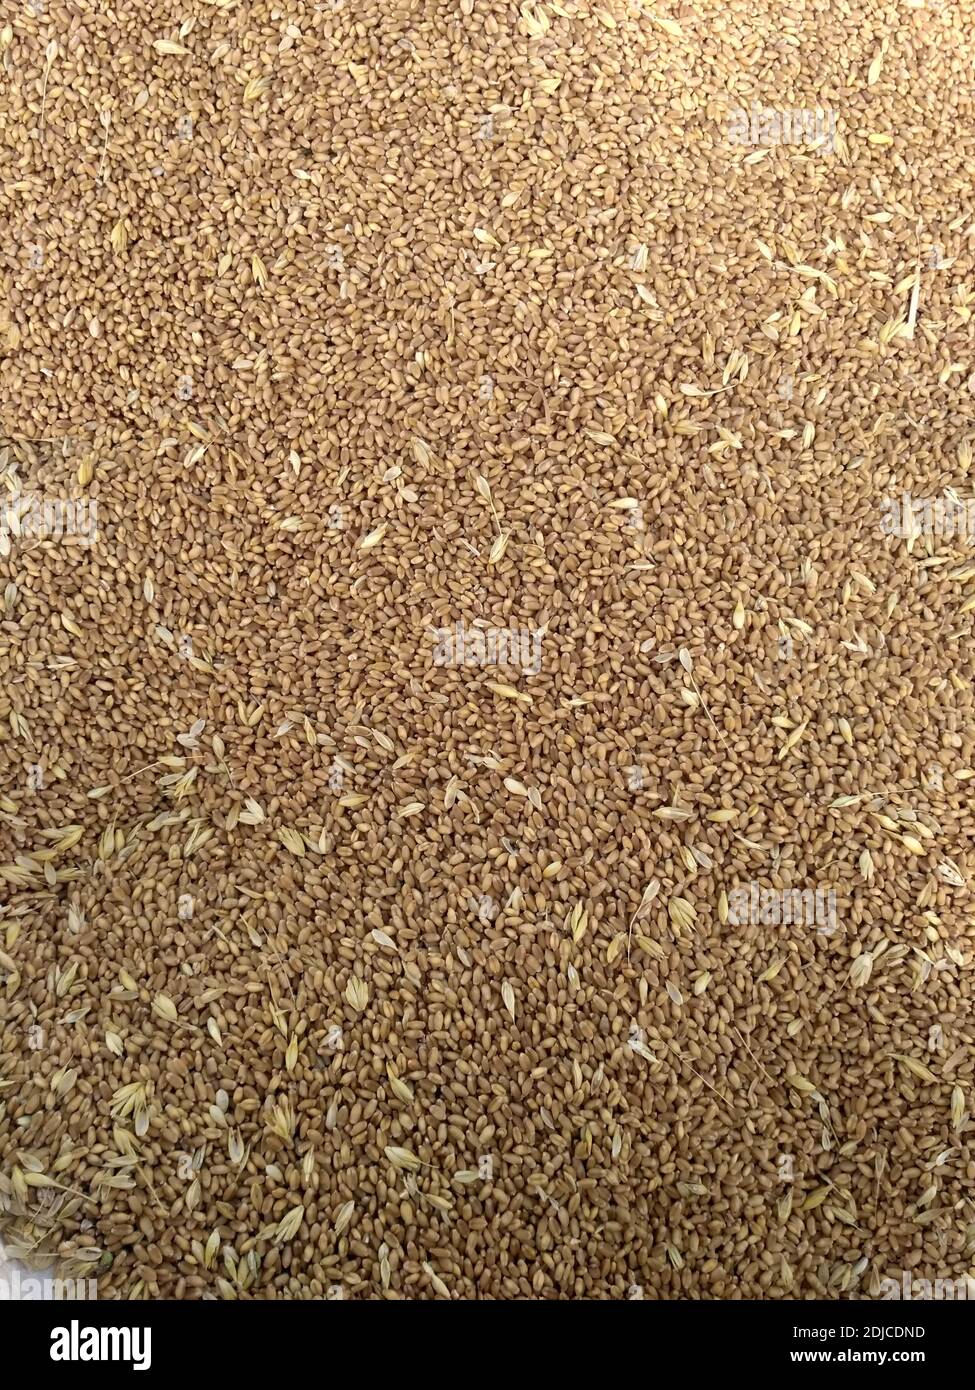 seed of wheat, Wheat grain as background texture Stock Photo